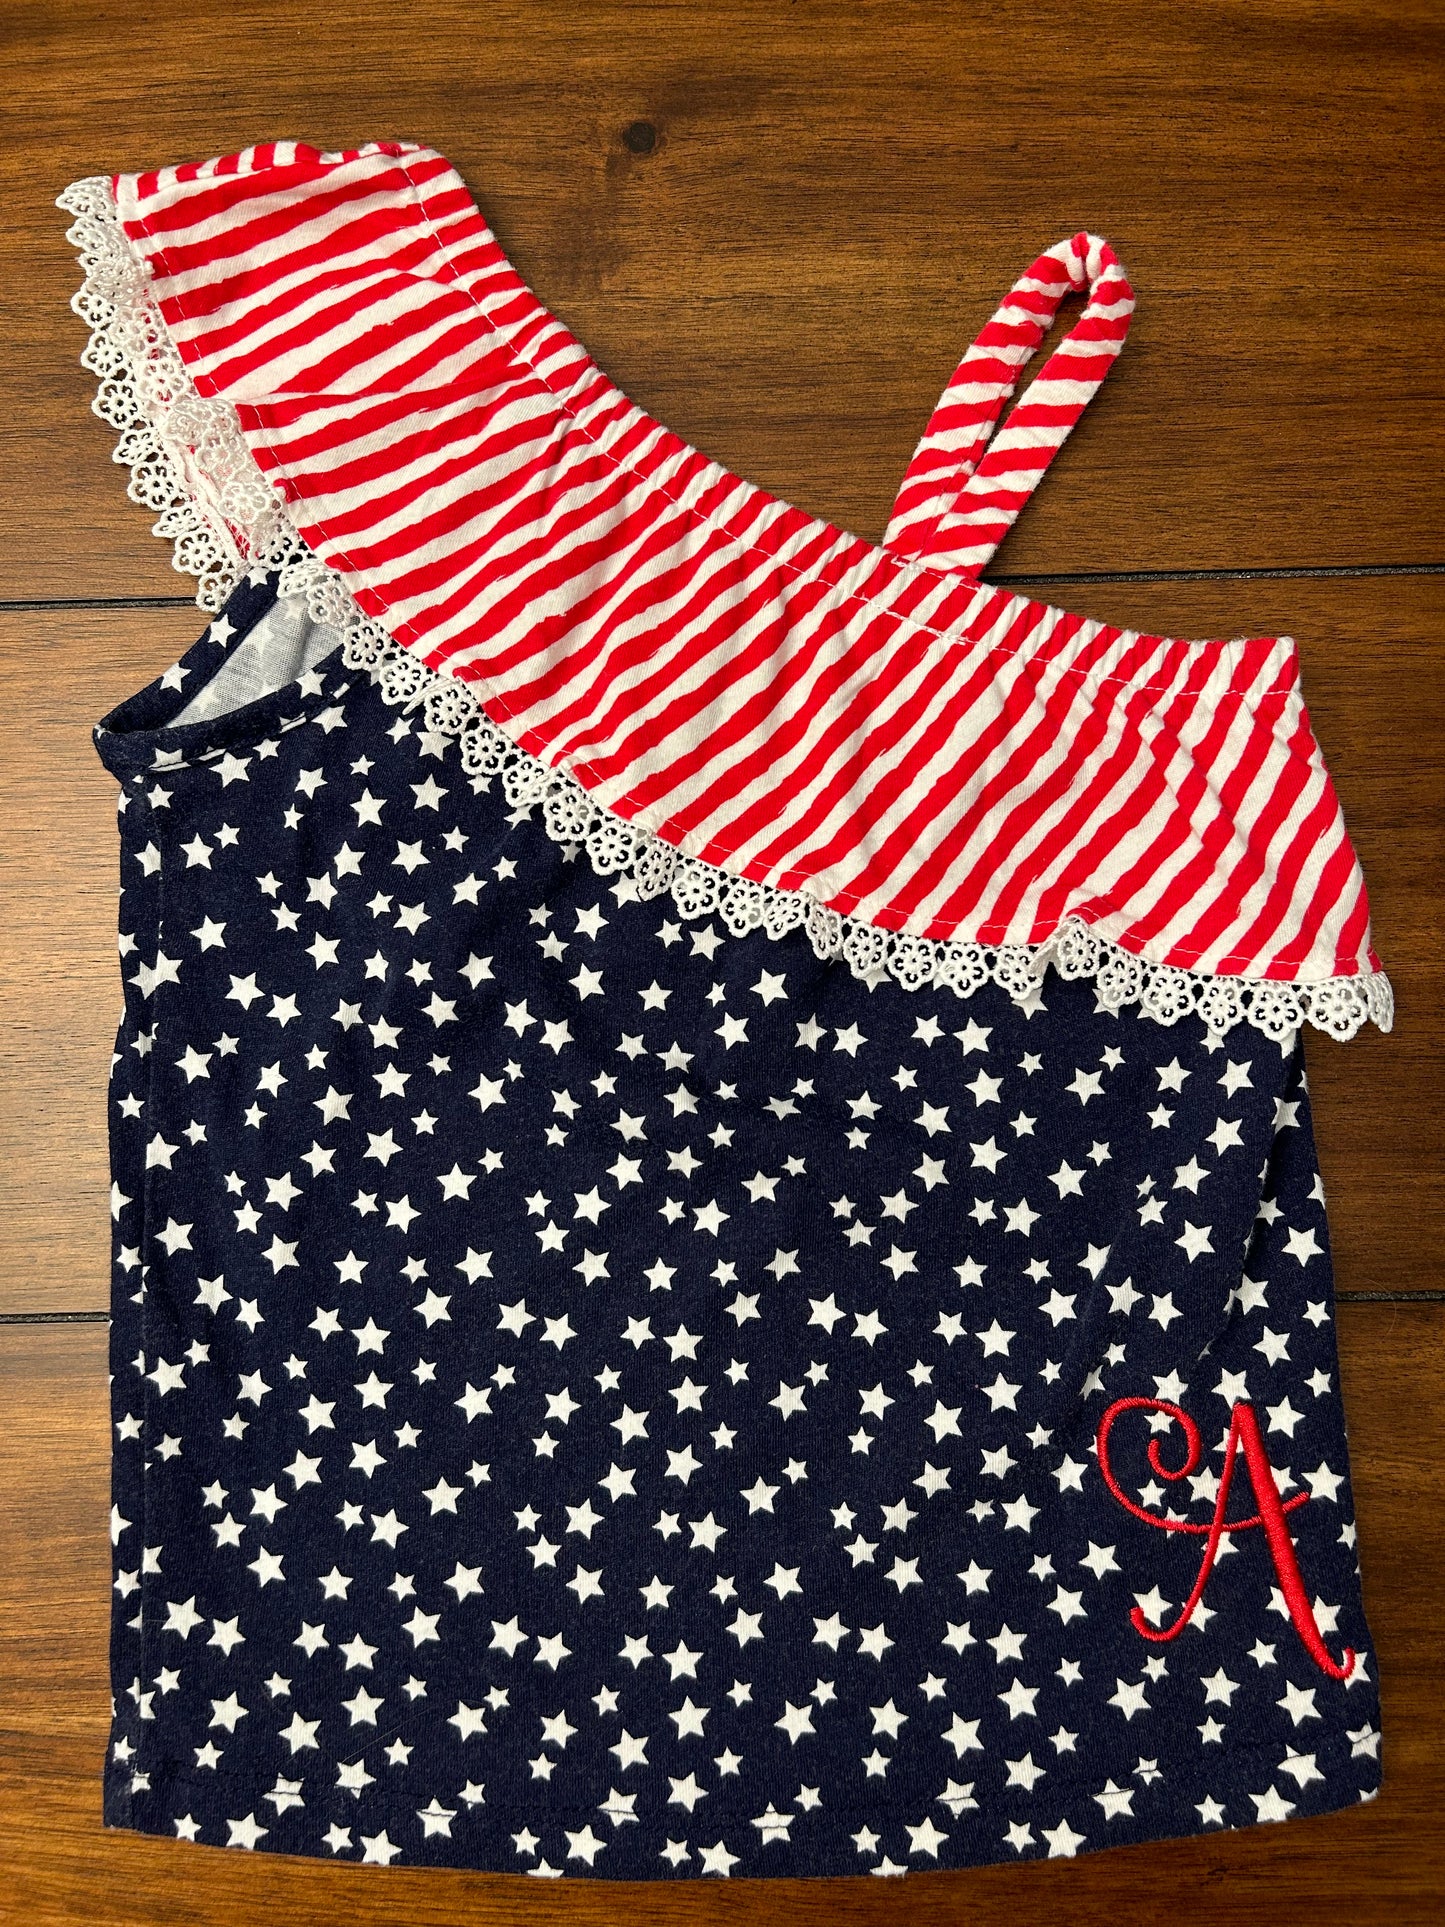 Girls Red White & Blue Patriotic Spaghetti Strap Top with Red Embroidered "A" Size 5T PPU 45040